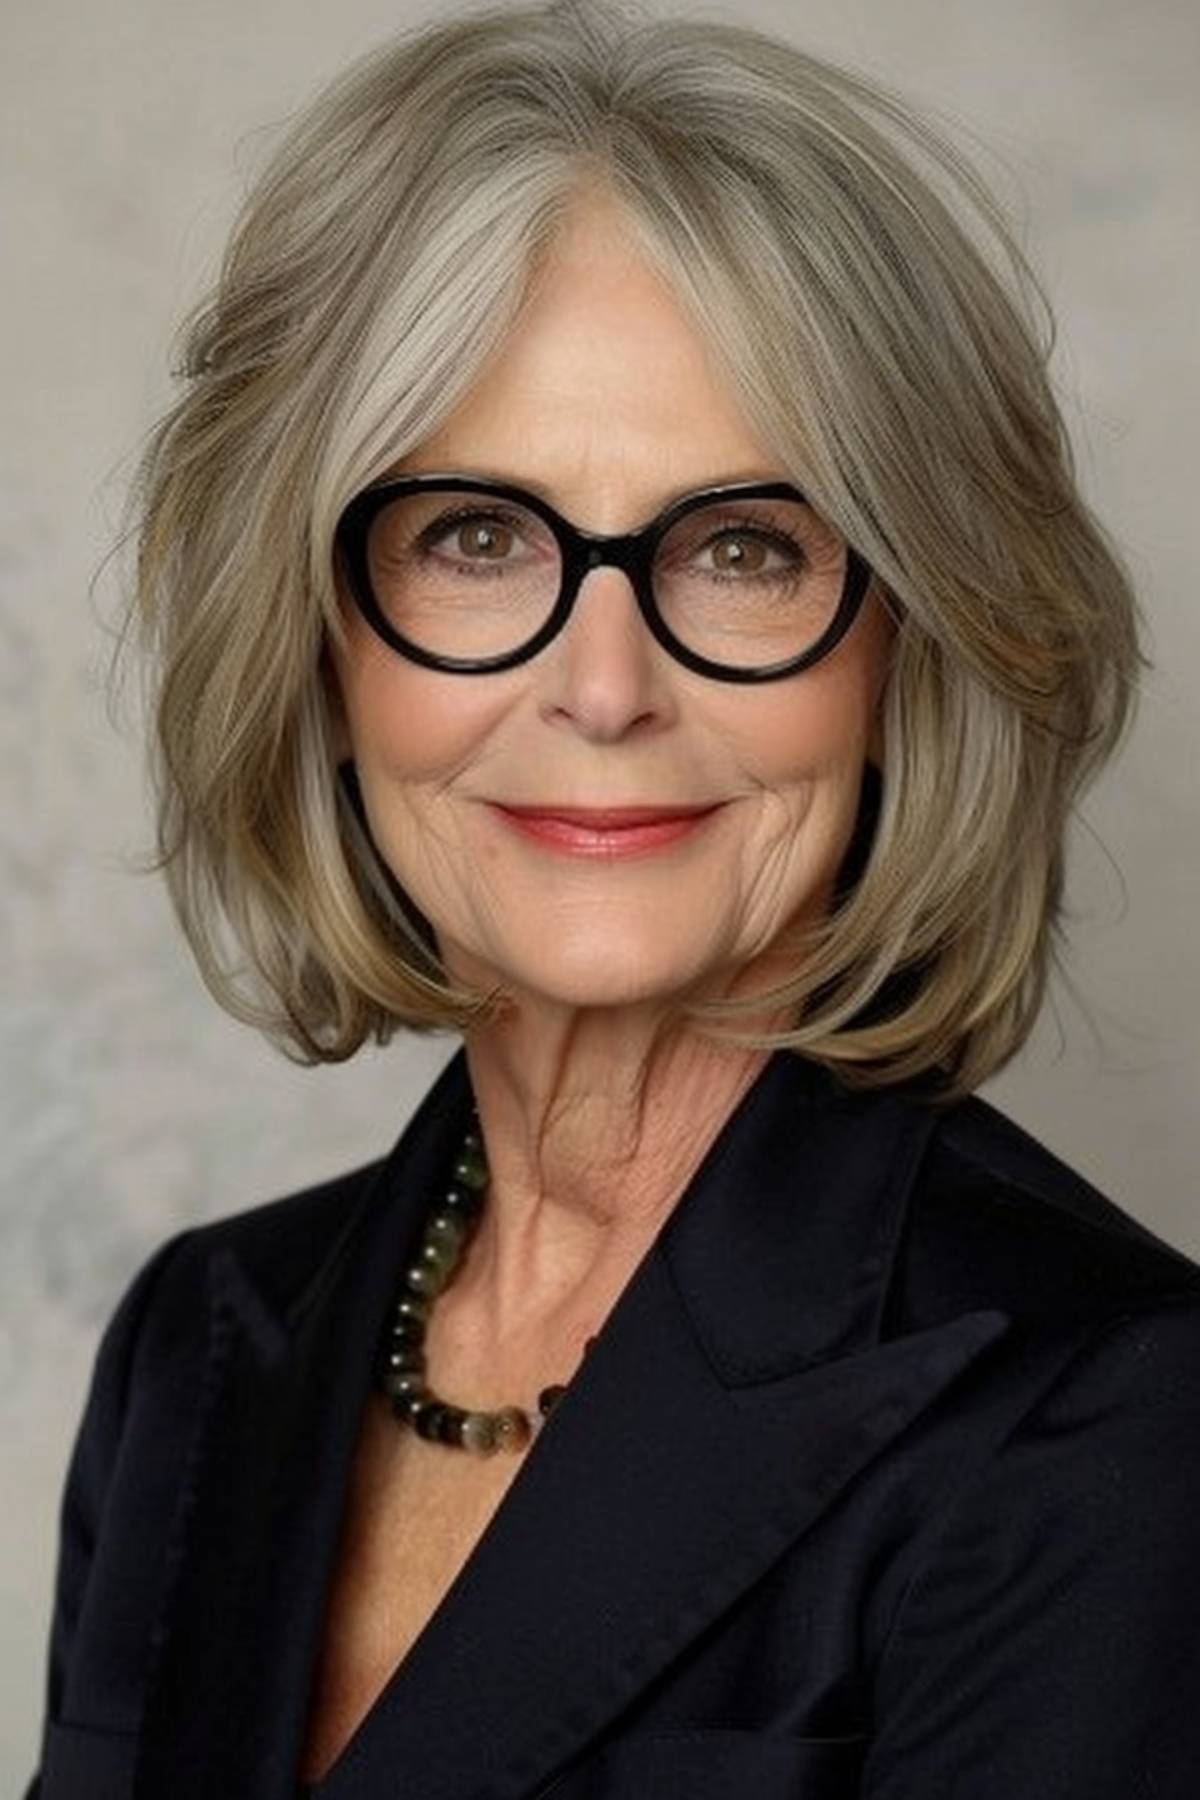 Elegant layered shoulder-length haircut on a woman over 50 with silver-gray hair, perfectly matching her stylish glasses. 